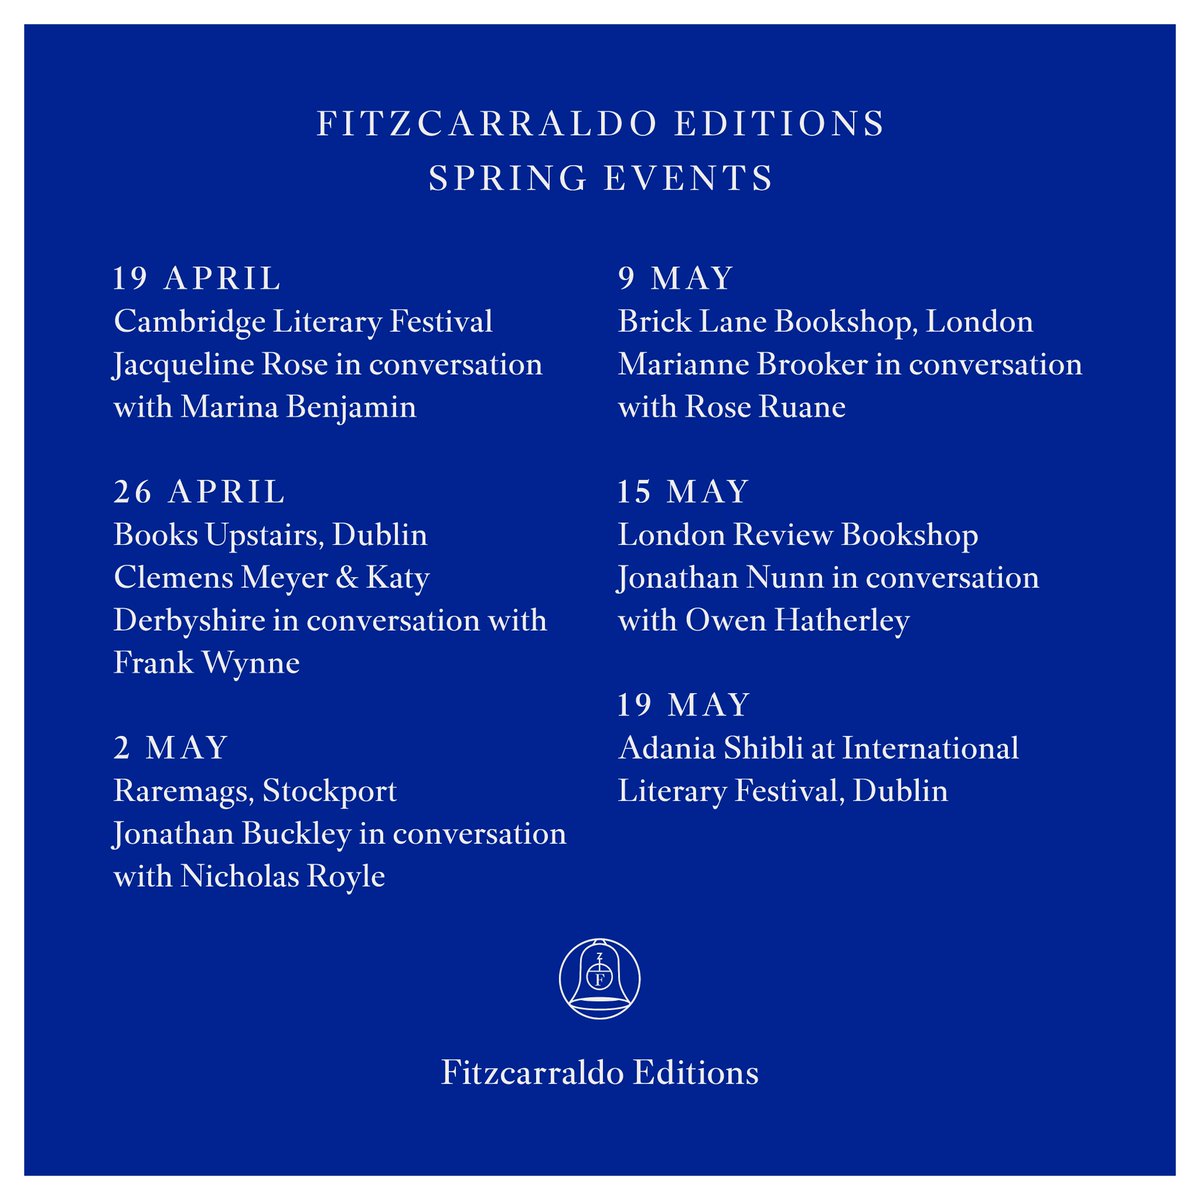 🌱🌷We're delighted to announce some Spring events!🌷🌱 More information and tickets here: blog.fitzcarraldoeditions.com/fitzcarraldo-e…